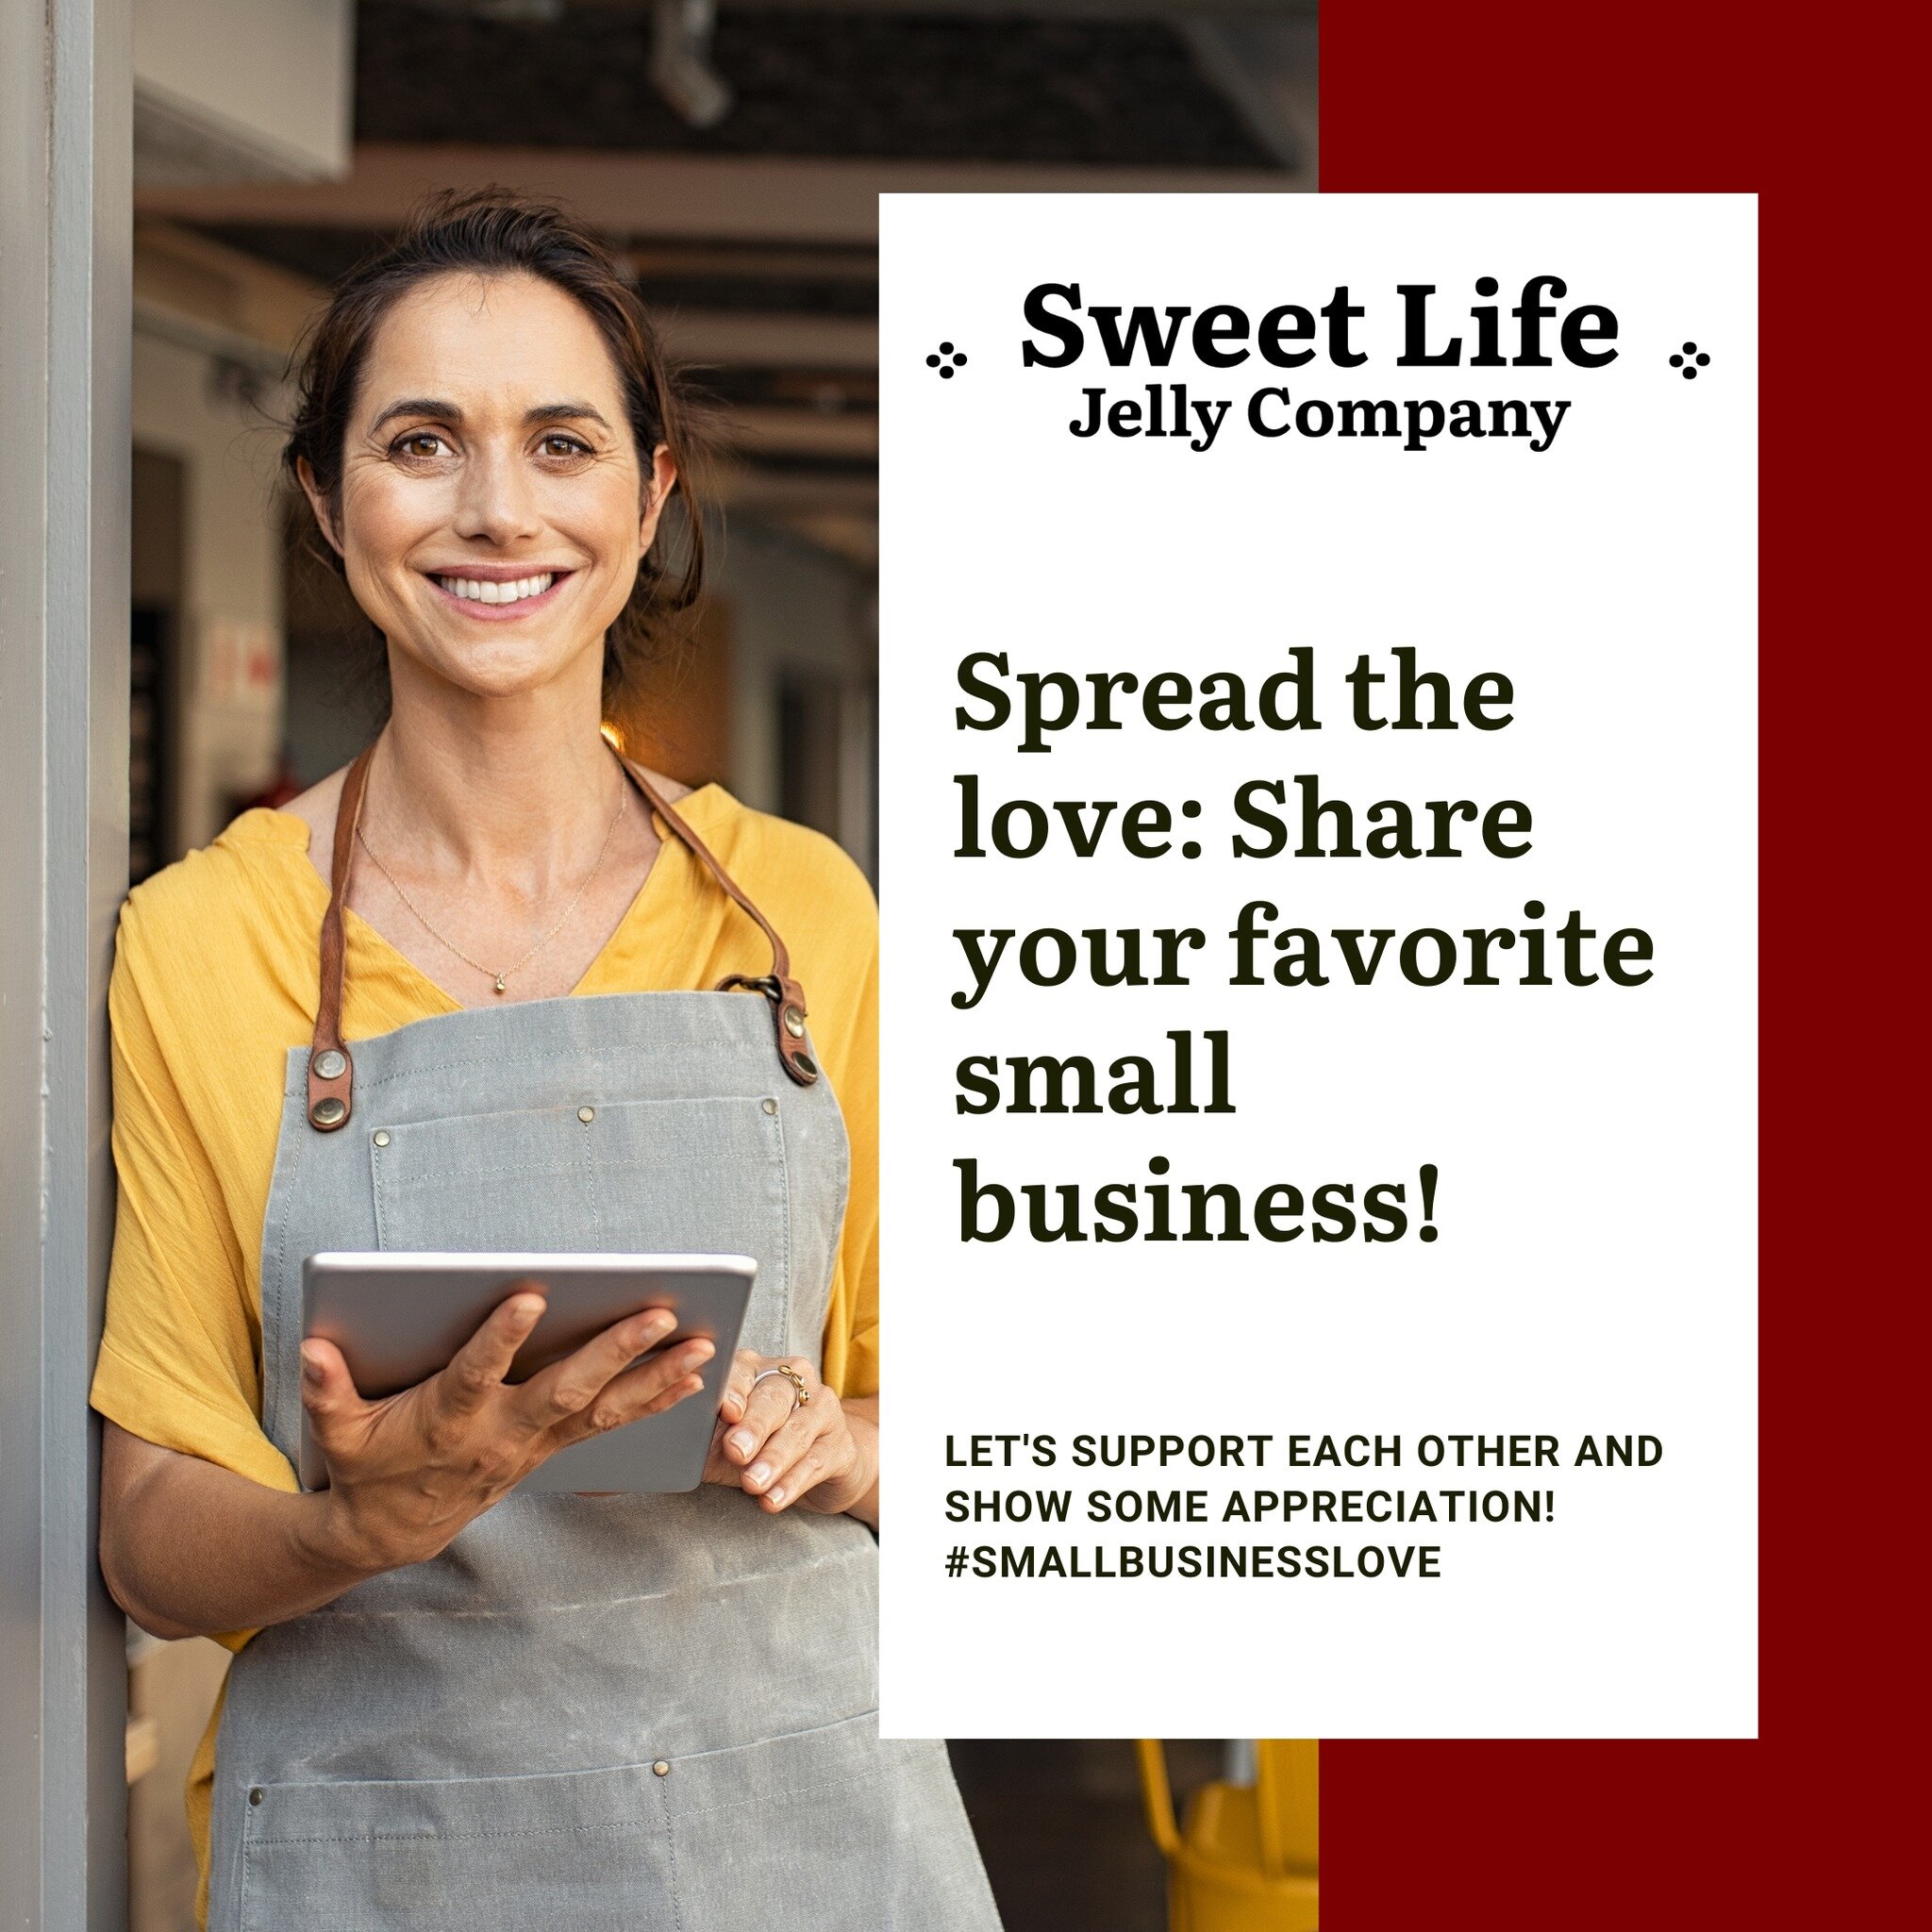 👏🎉WAY TO GO WEDNESDAY: SHARE A SMALL BUSINESS THAT HAS BEEN DOING A GREAT JOB!🥳🙌

We wanna know a small business or two that has been going above and beyond for you! Tag them below!

#smallbusinesslove #waytogowednesday #smallbuisinesssupport